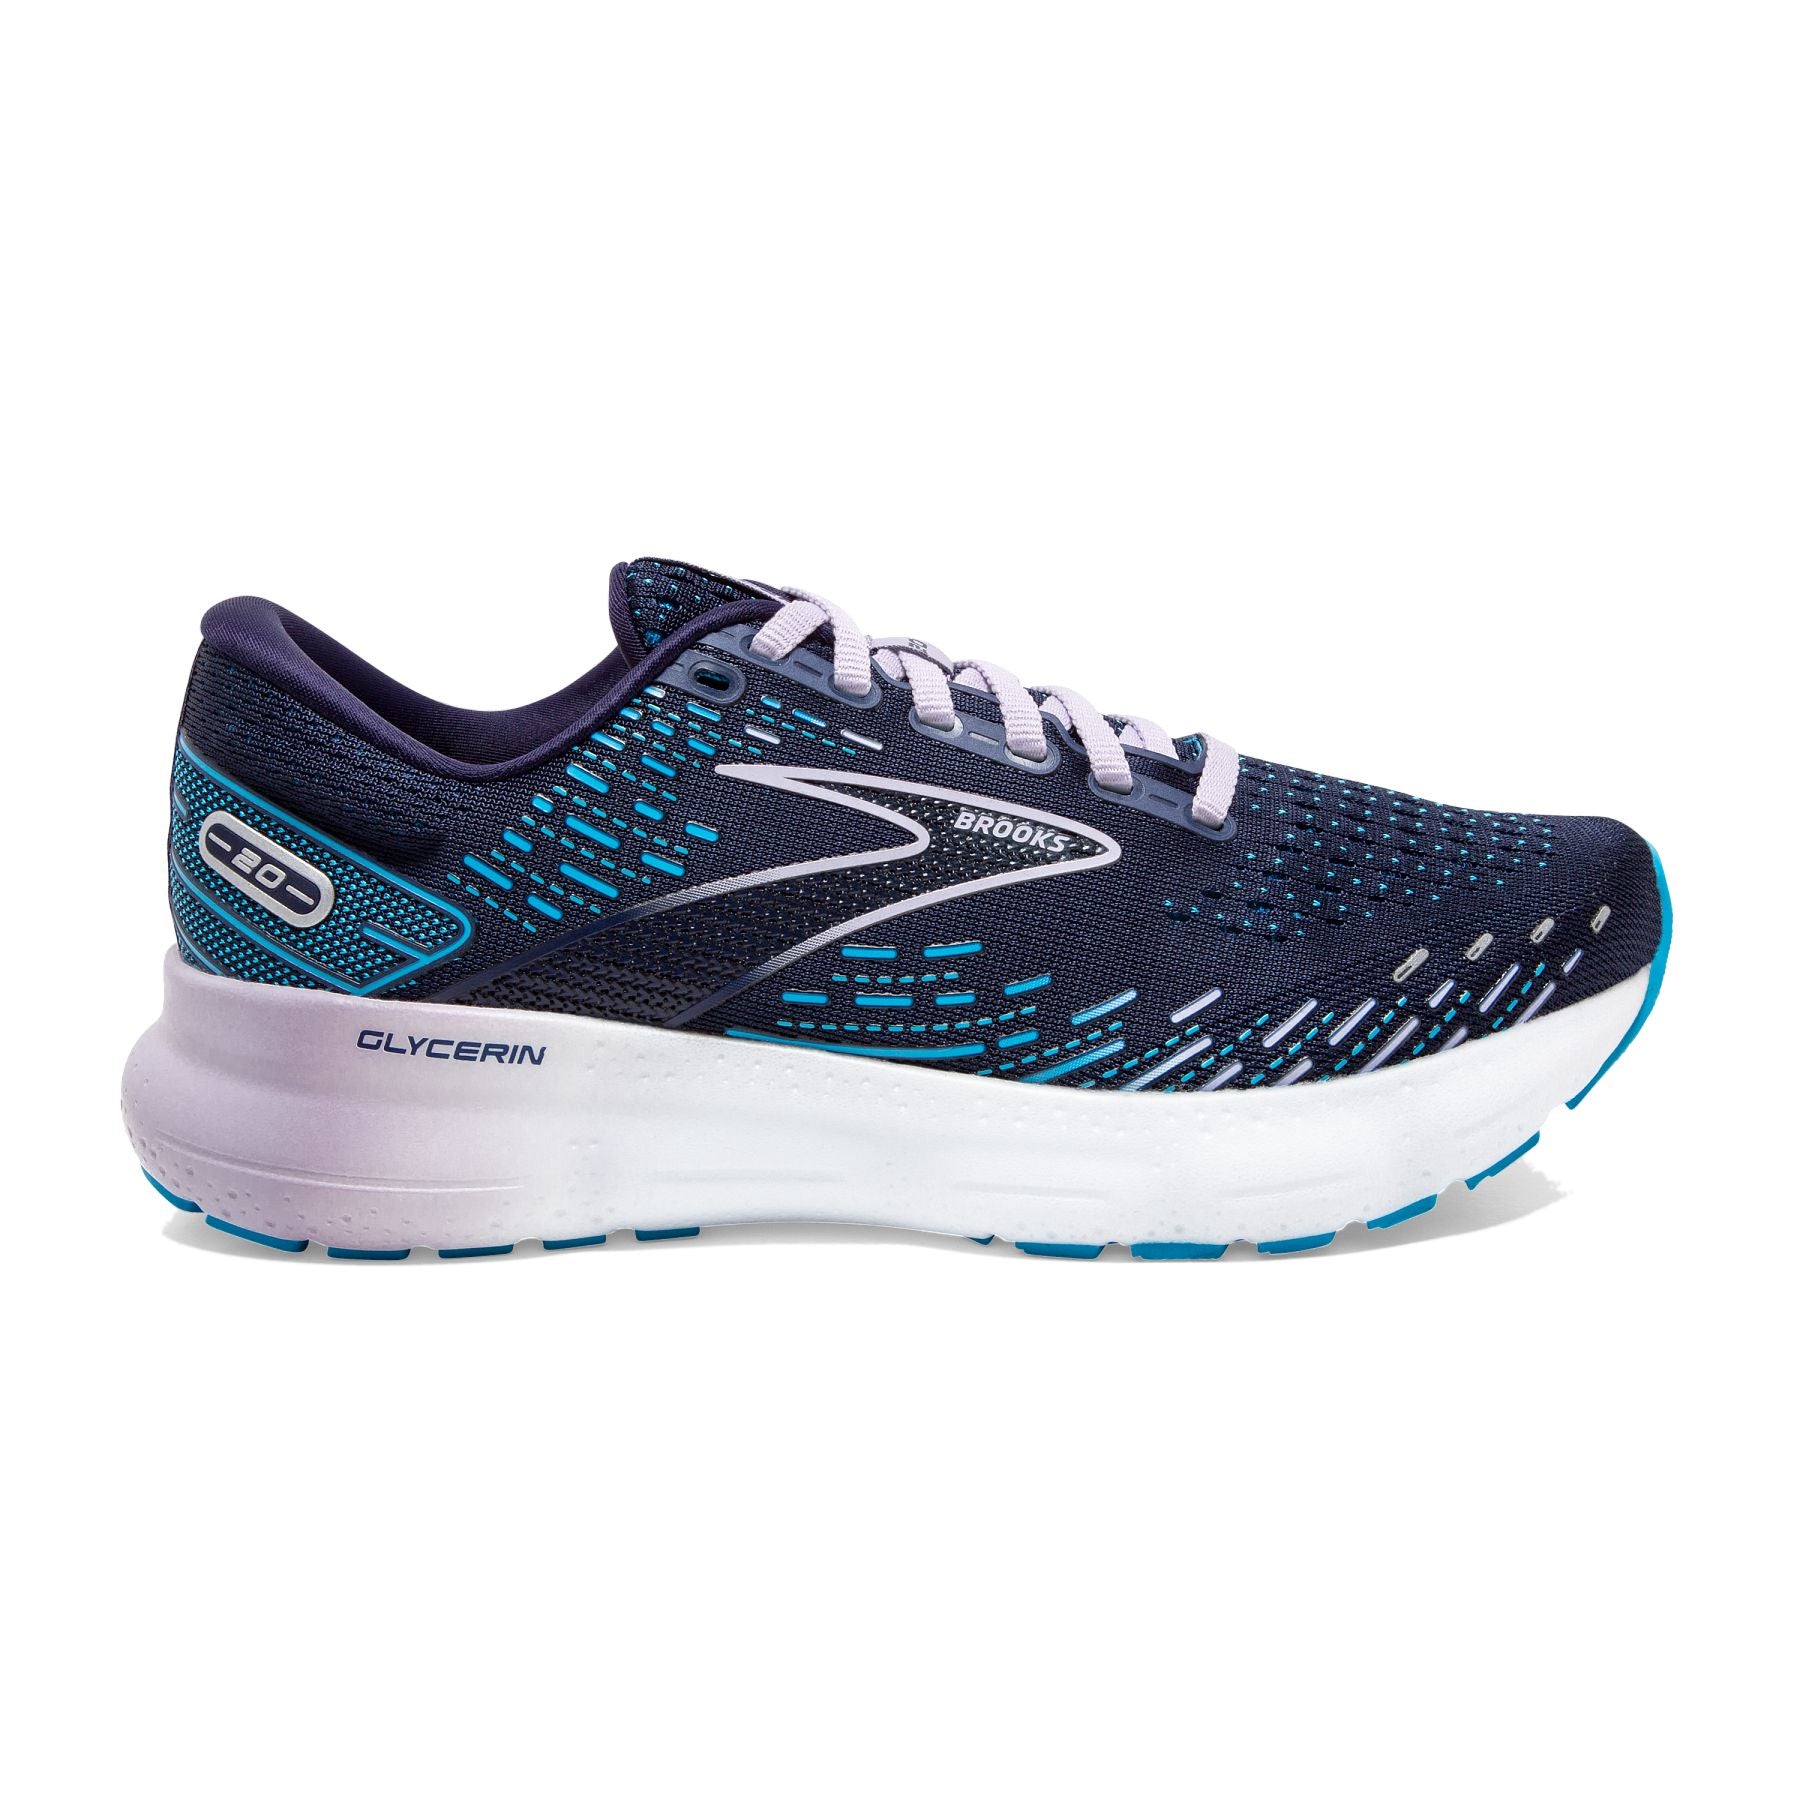 Lateral view of the Women's BROOKS Glycerin 20 in the Narrow "2A" width, color Peacoat/Ocean/Pastel Lilac